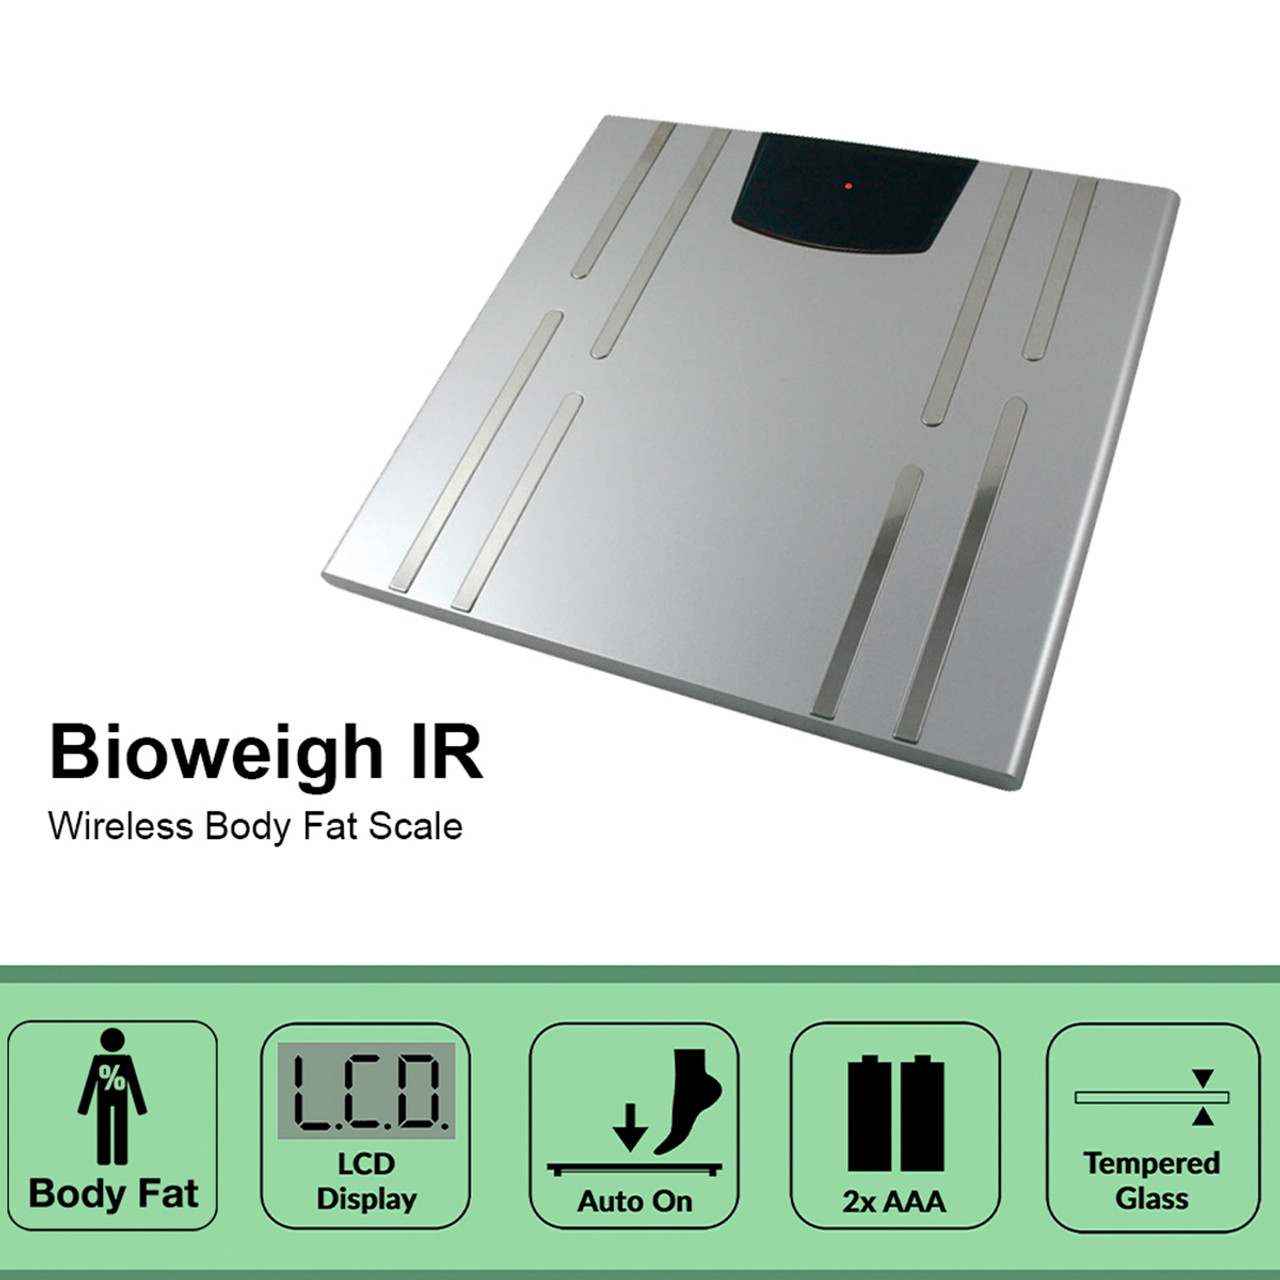 American Weigh Scales Bioweigh-Ir BMI Fitness Scale with Remote